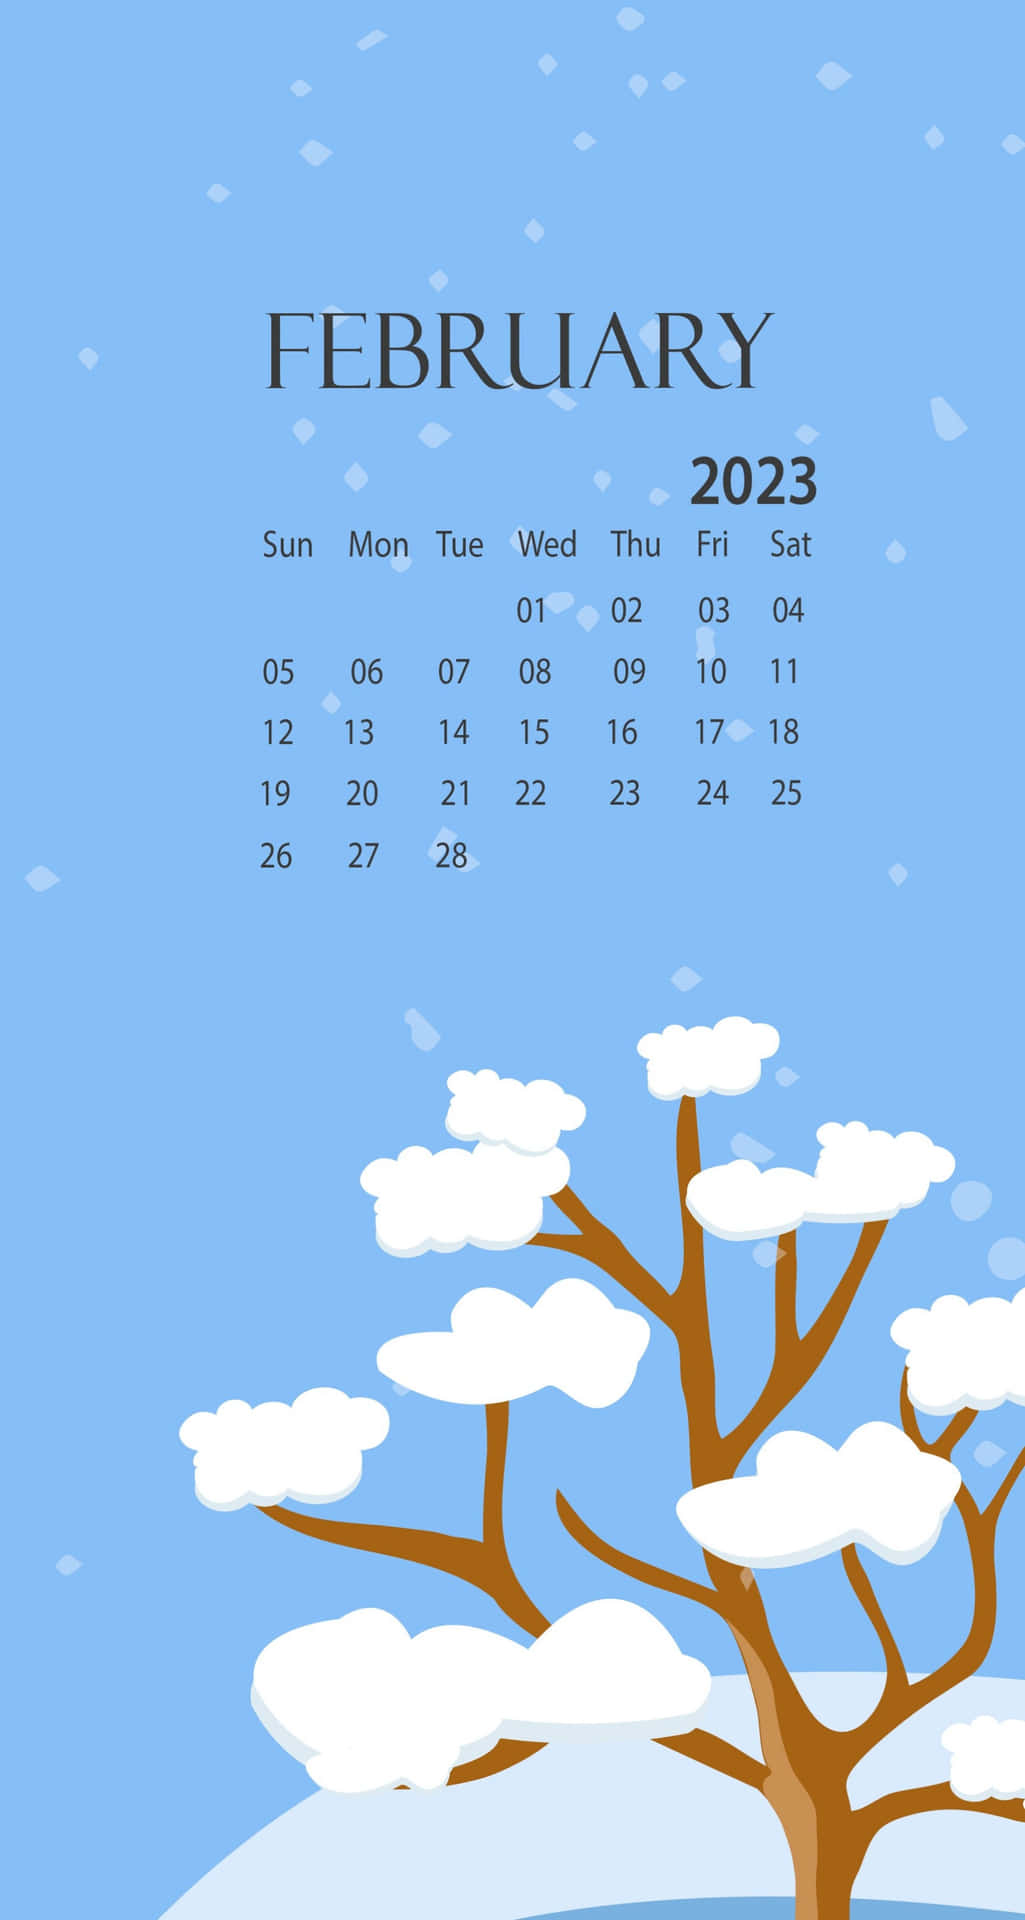 A Calendar With A Snowy Tree And Snow Wallpaper